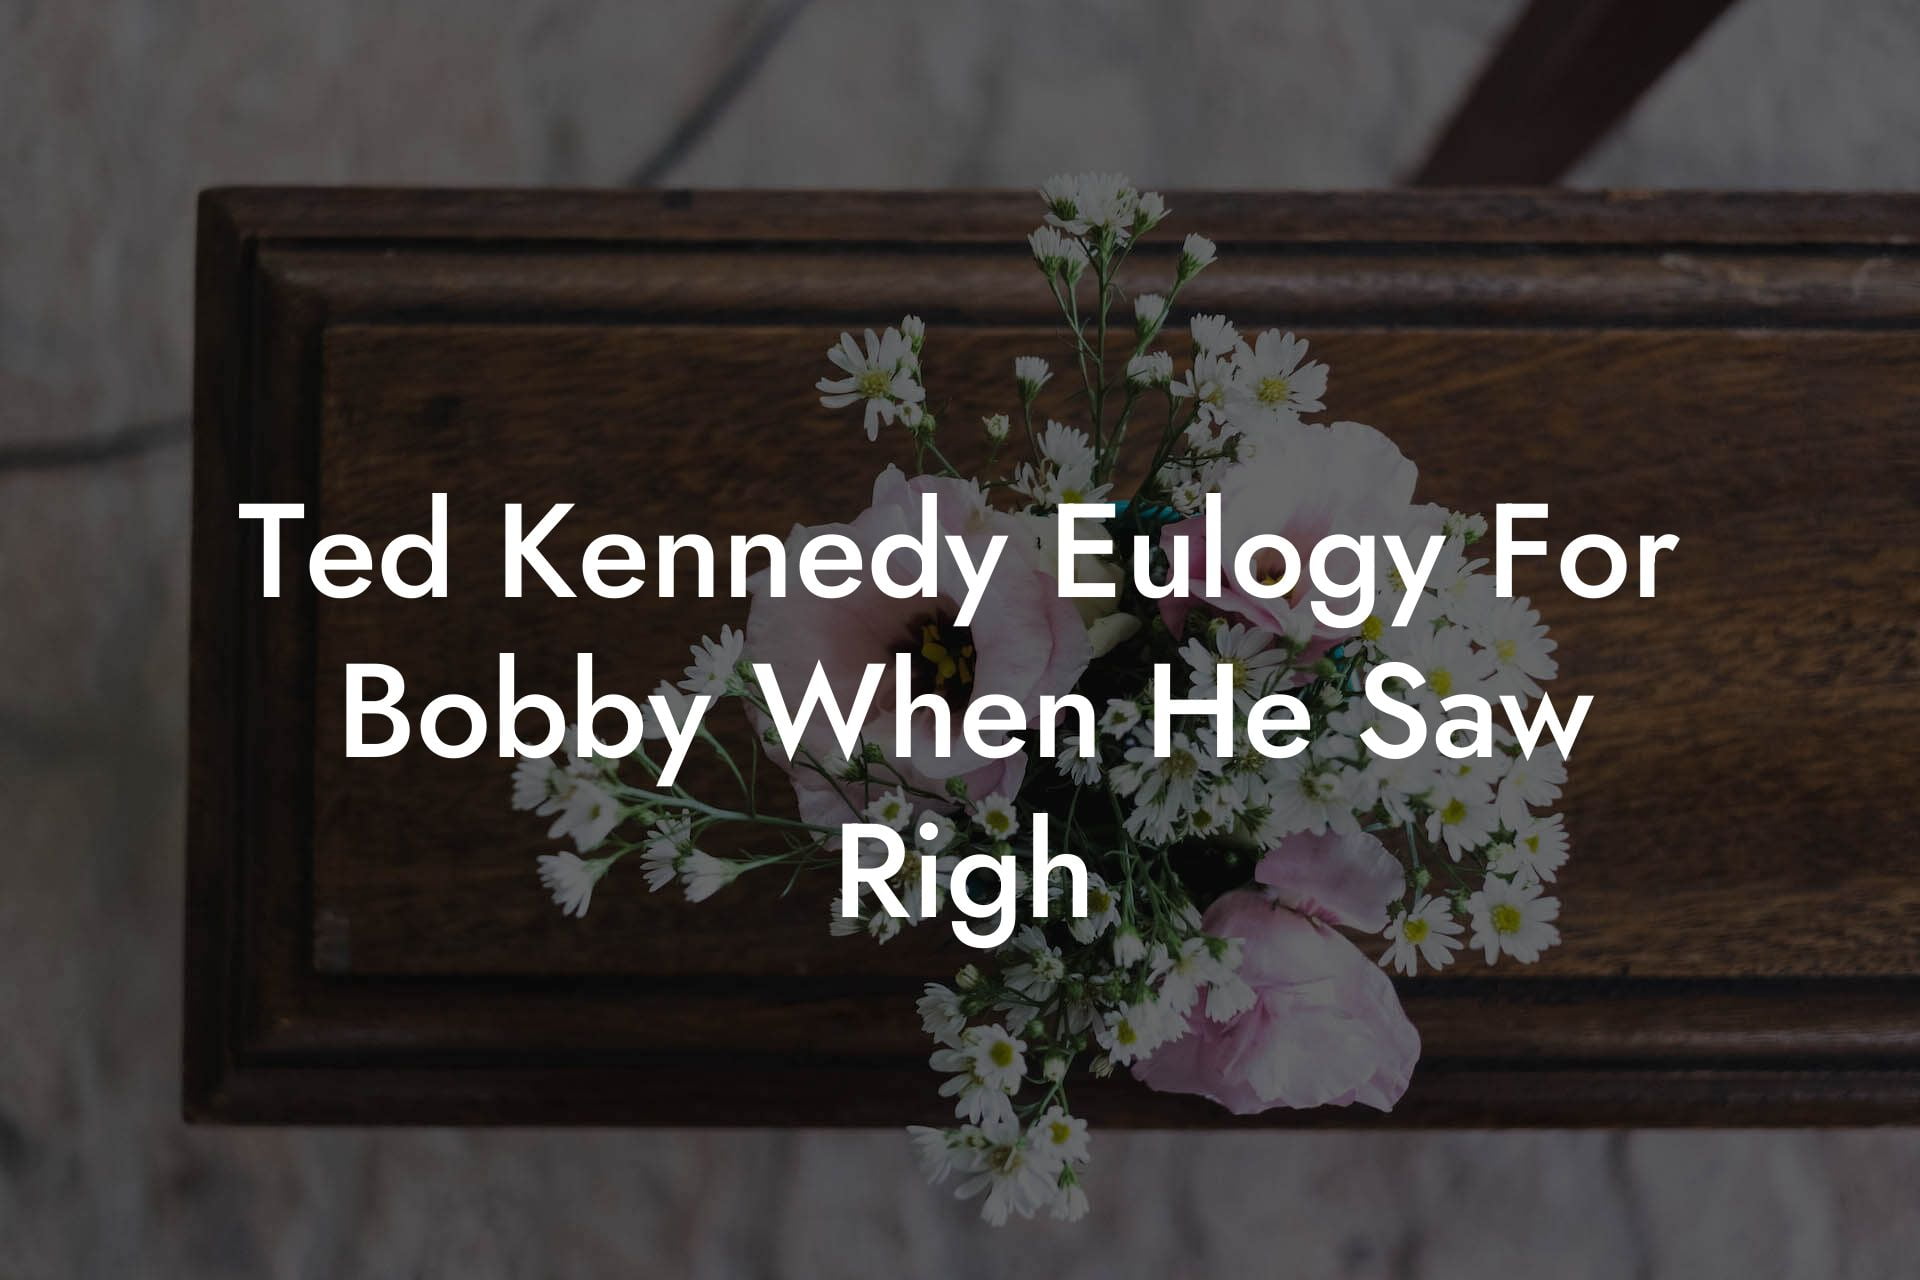 Ted Kennedy Eulogy For Bobby When He Saw Righ